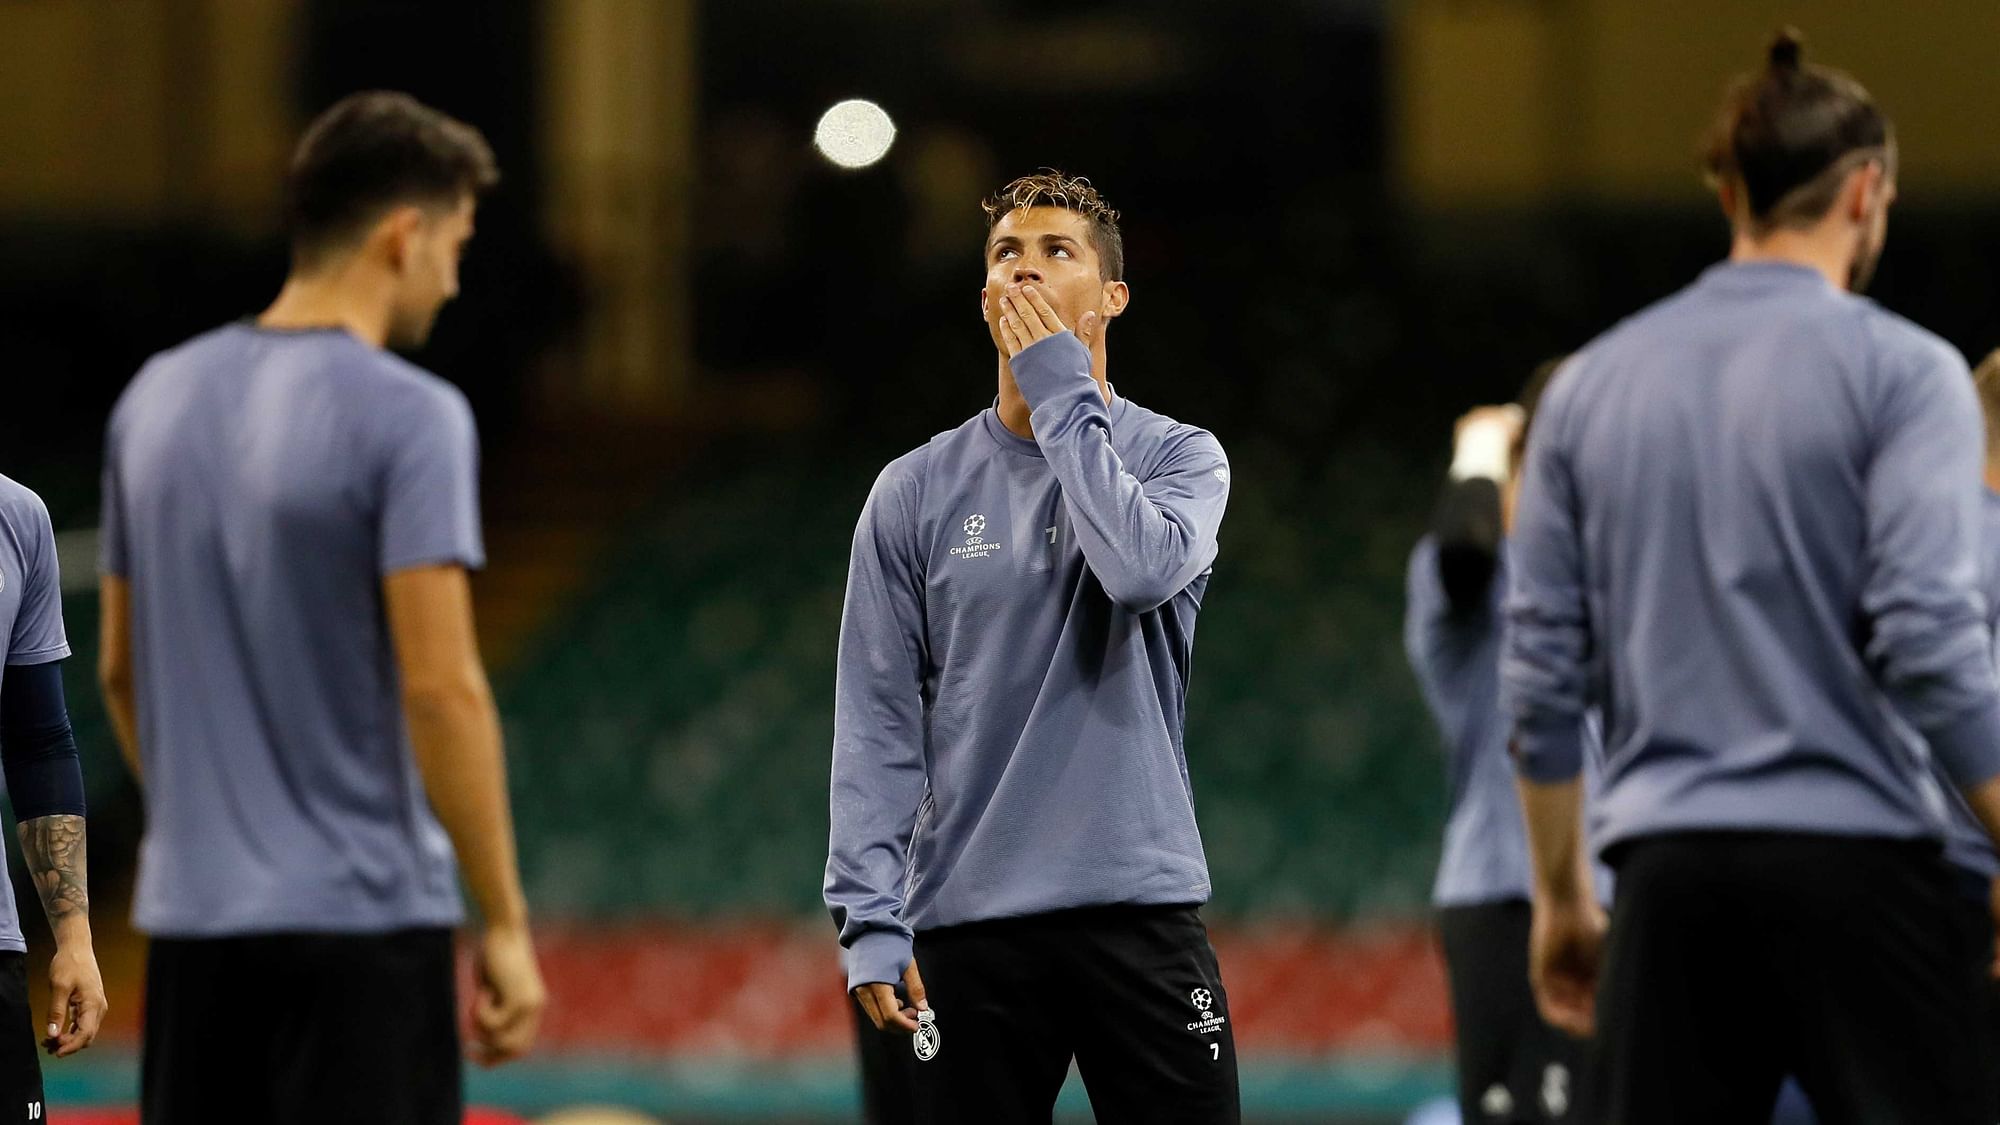 Real Madrid’s Cristiano Ronaldo, center, looks up during a training session at the Millennium Stadium in Cardiff, Wales Friday June 2, 2017.  (Photo: AP)